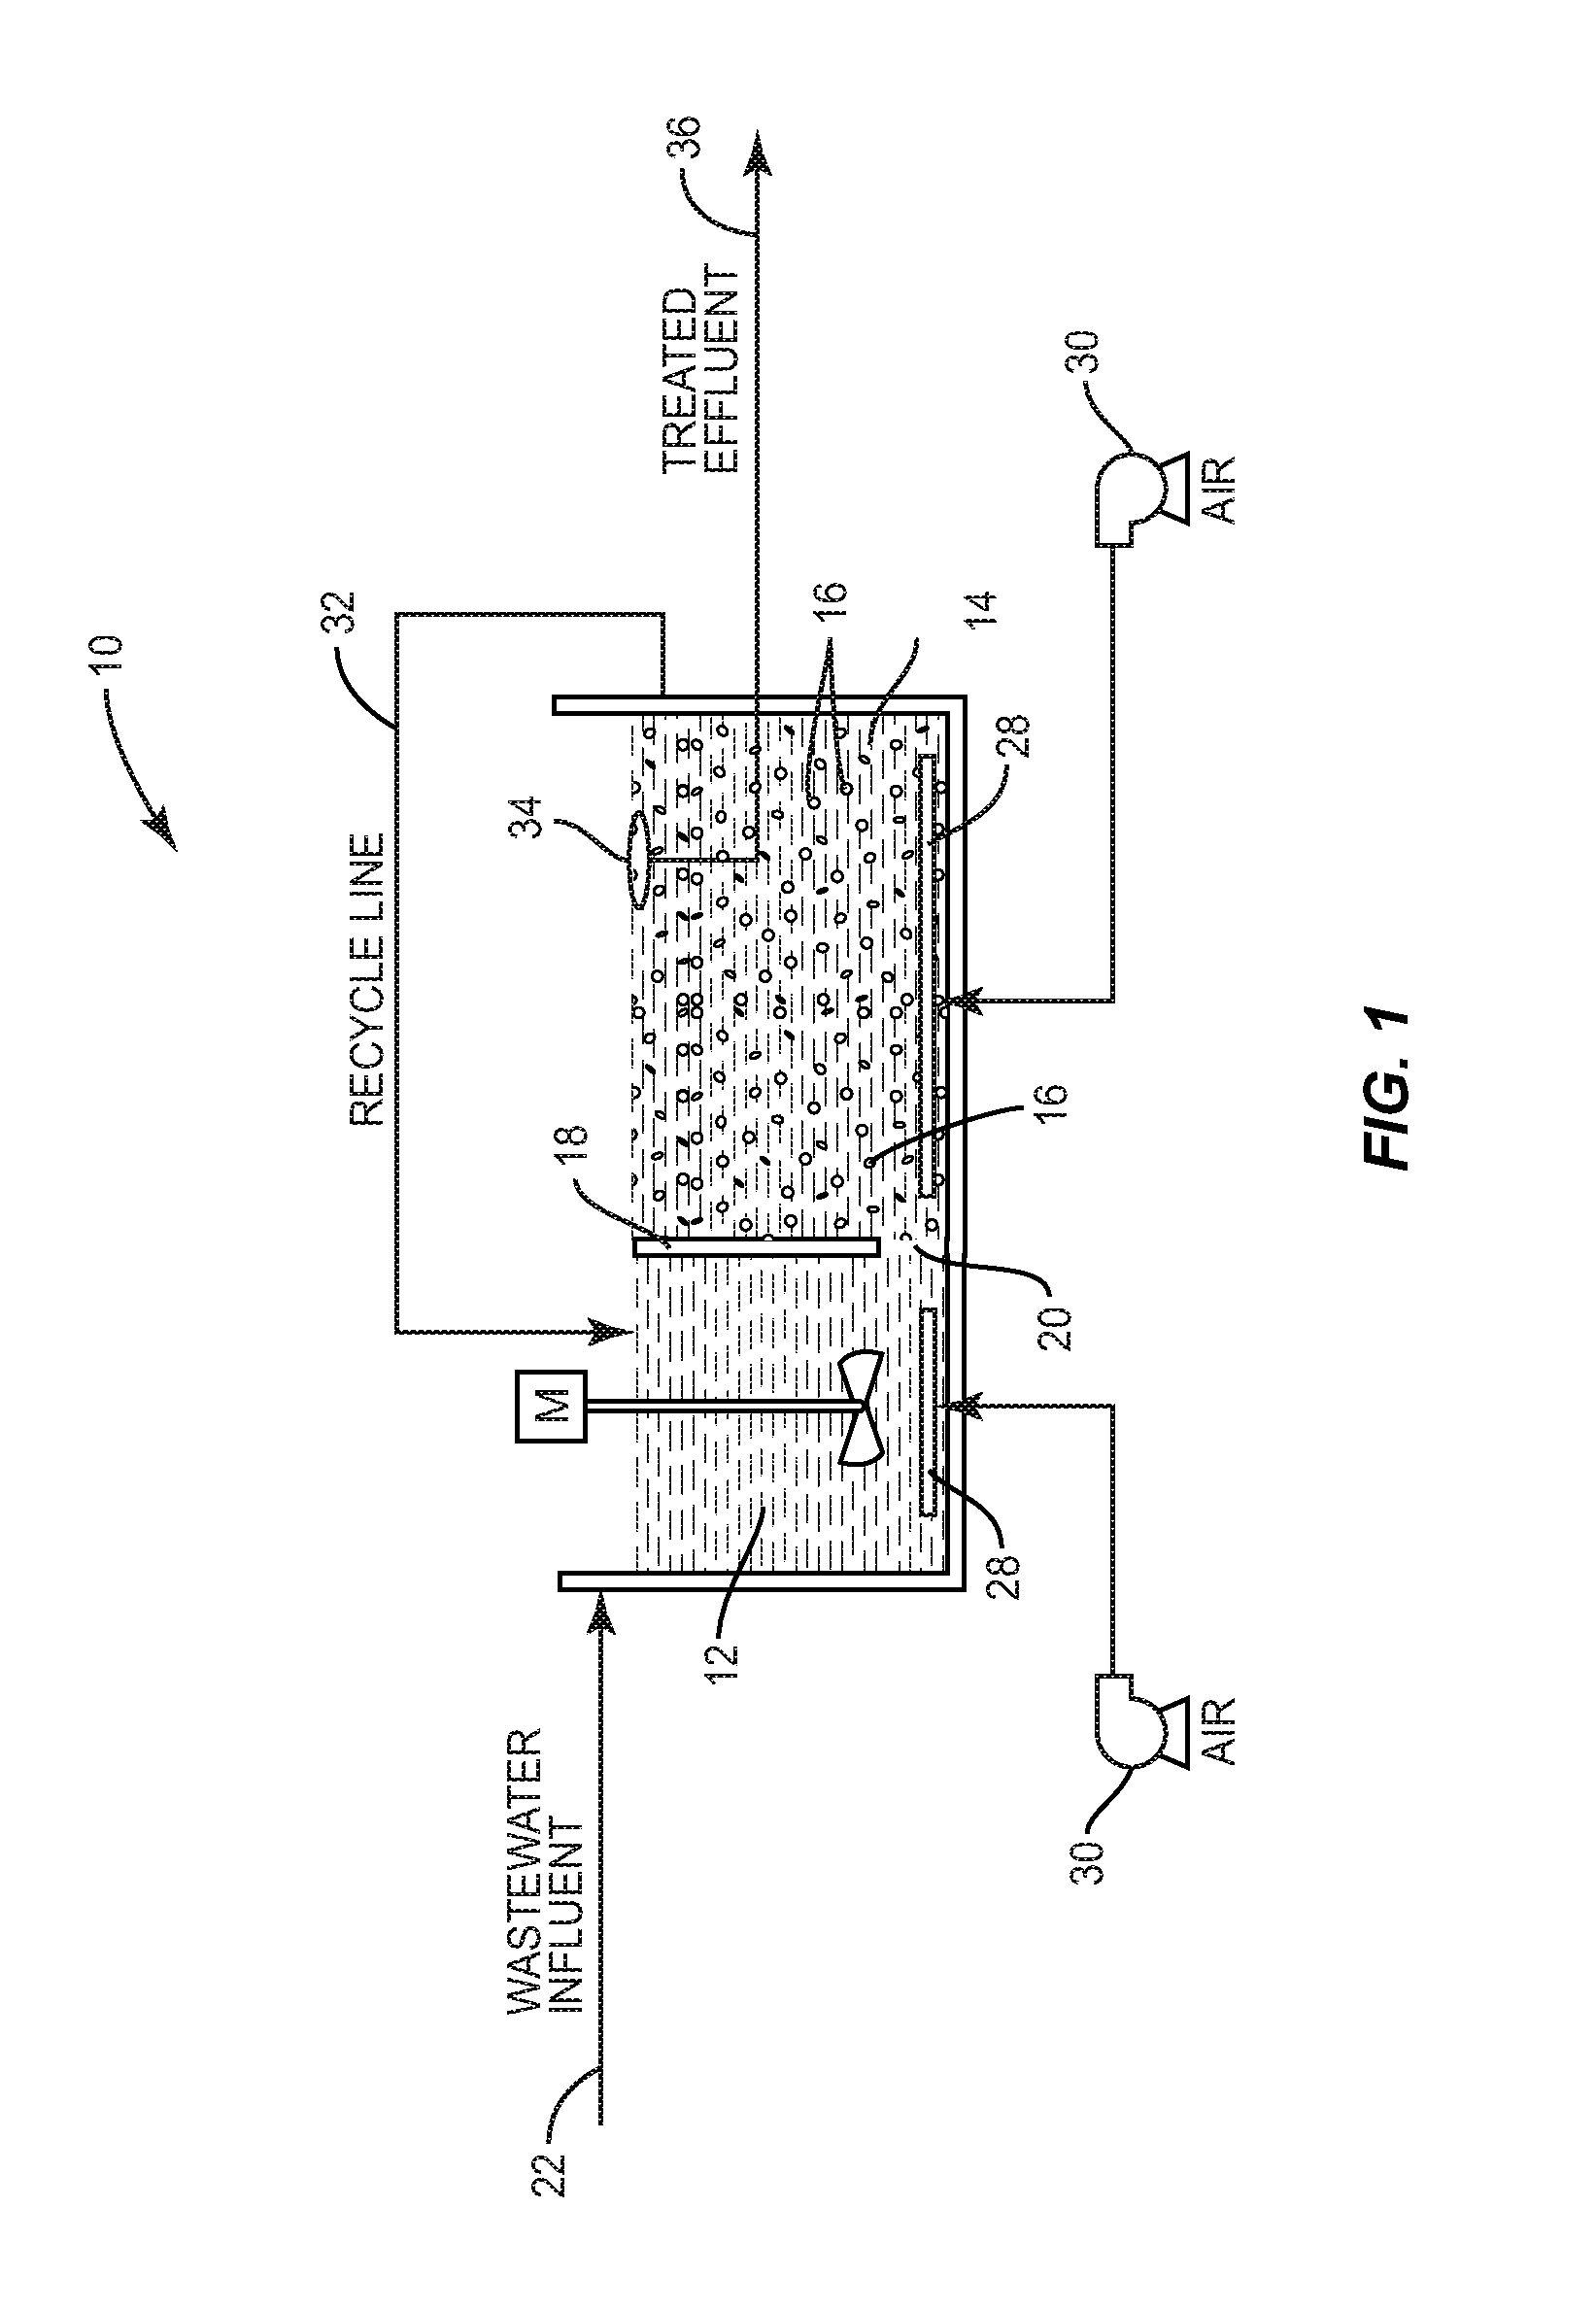 Method and system for treating wastewater in an integrated fixed film activated sludge sequencing batch reactor